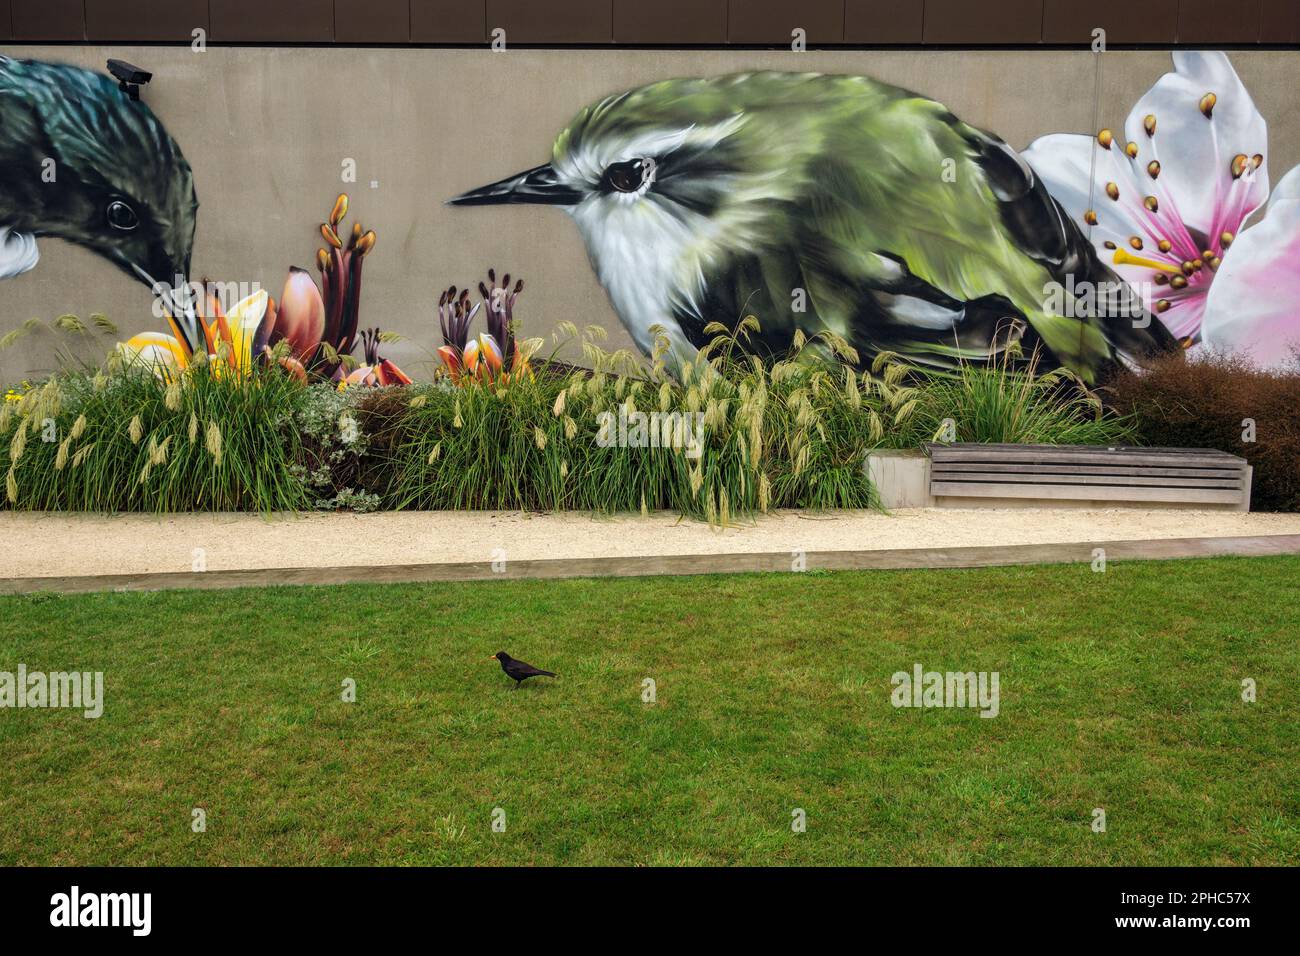 Mural of birds with a real blackbird looking for worms on a grass lawn, Christchurch, New Zealand Stock Photo